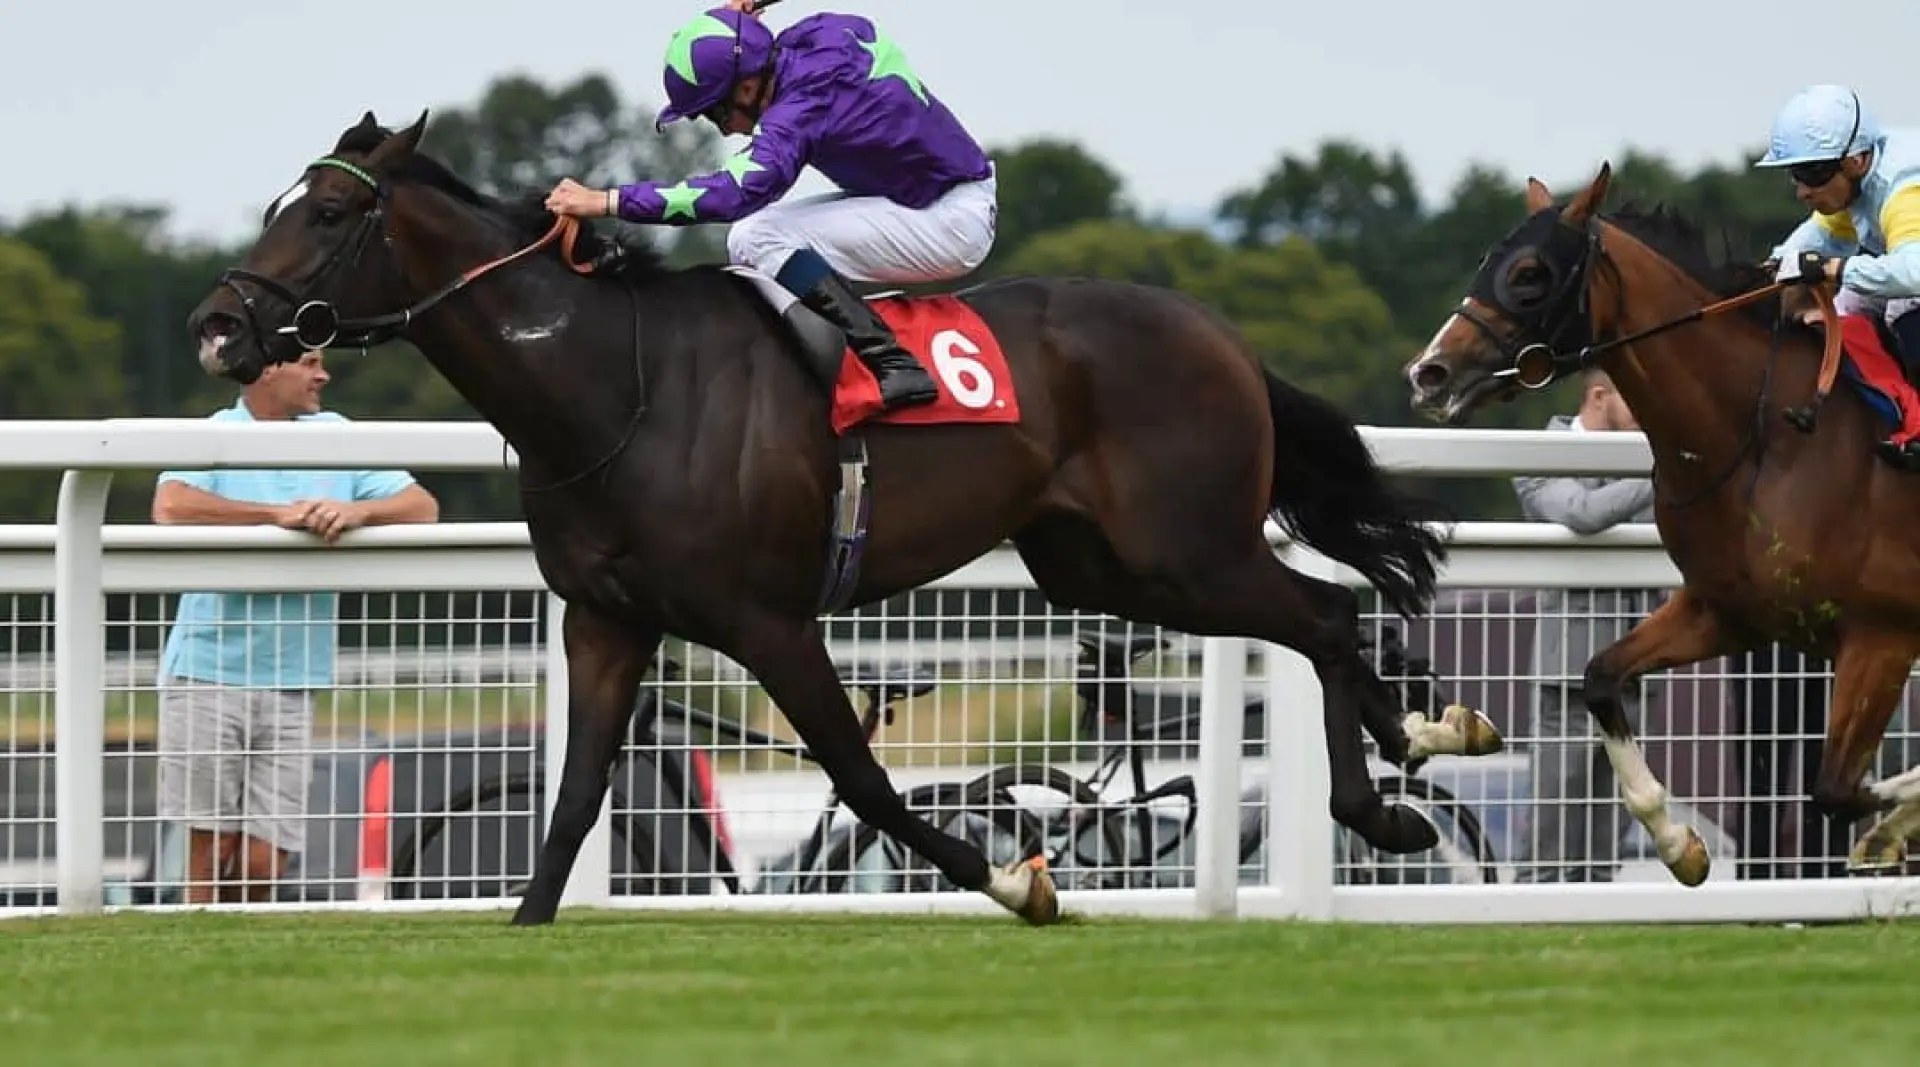 Mojito odds, Newmarket odds, Ascot Challenge Cup odds, Newmarket odds